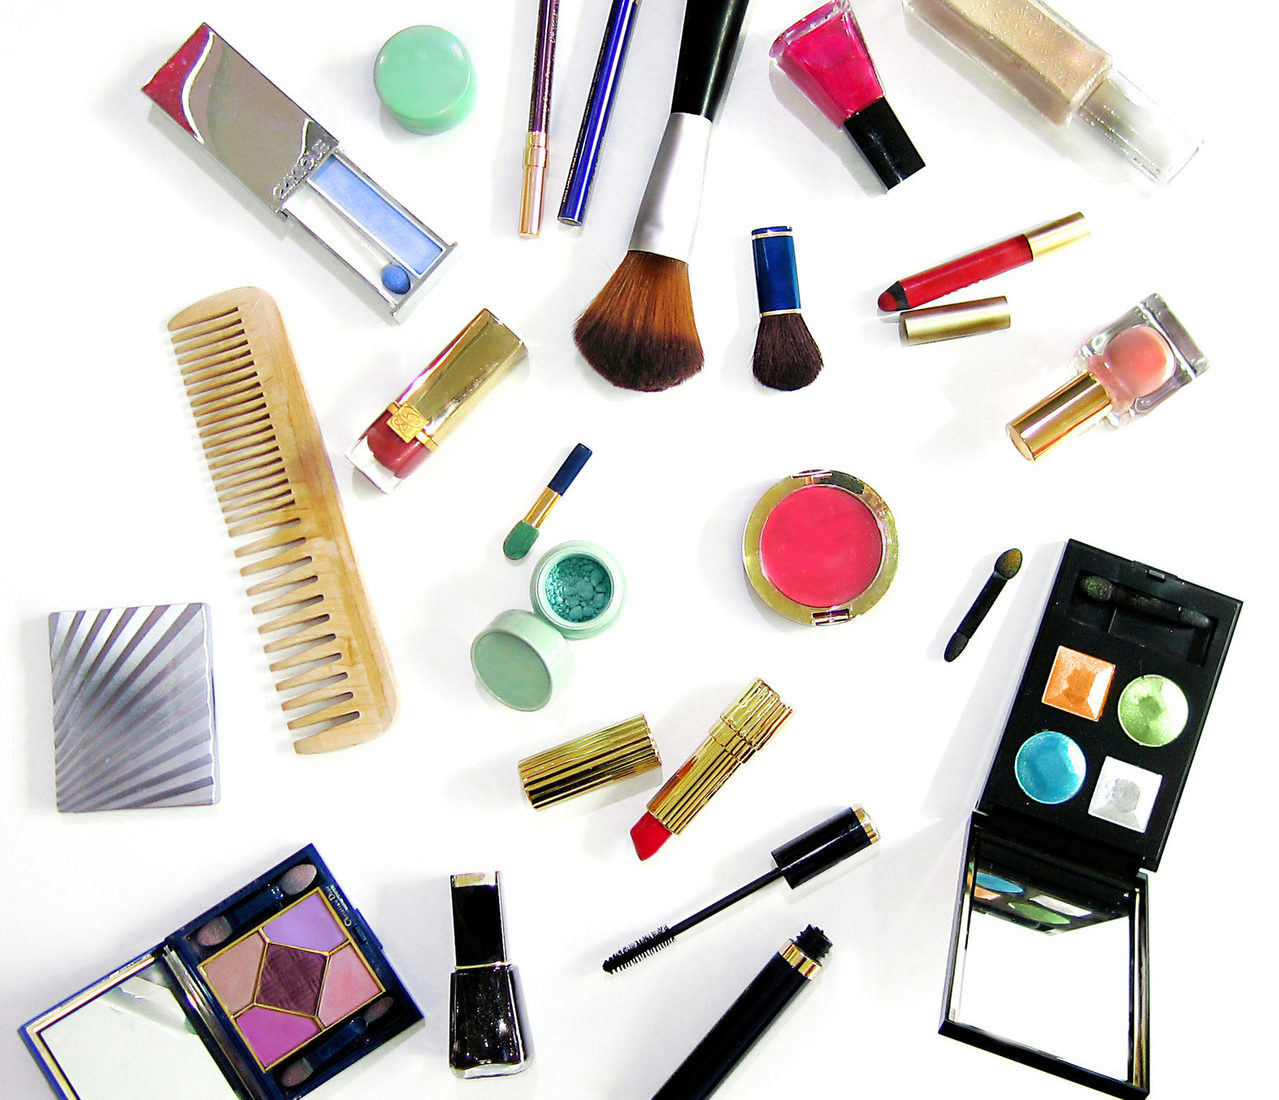 Makeup items scattered